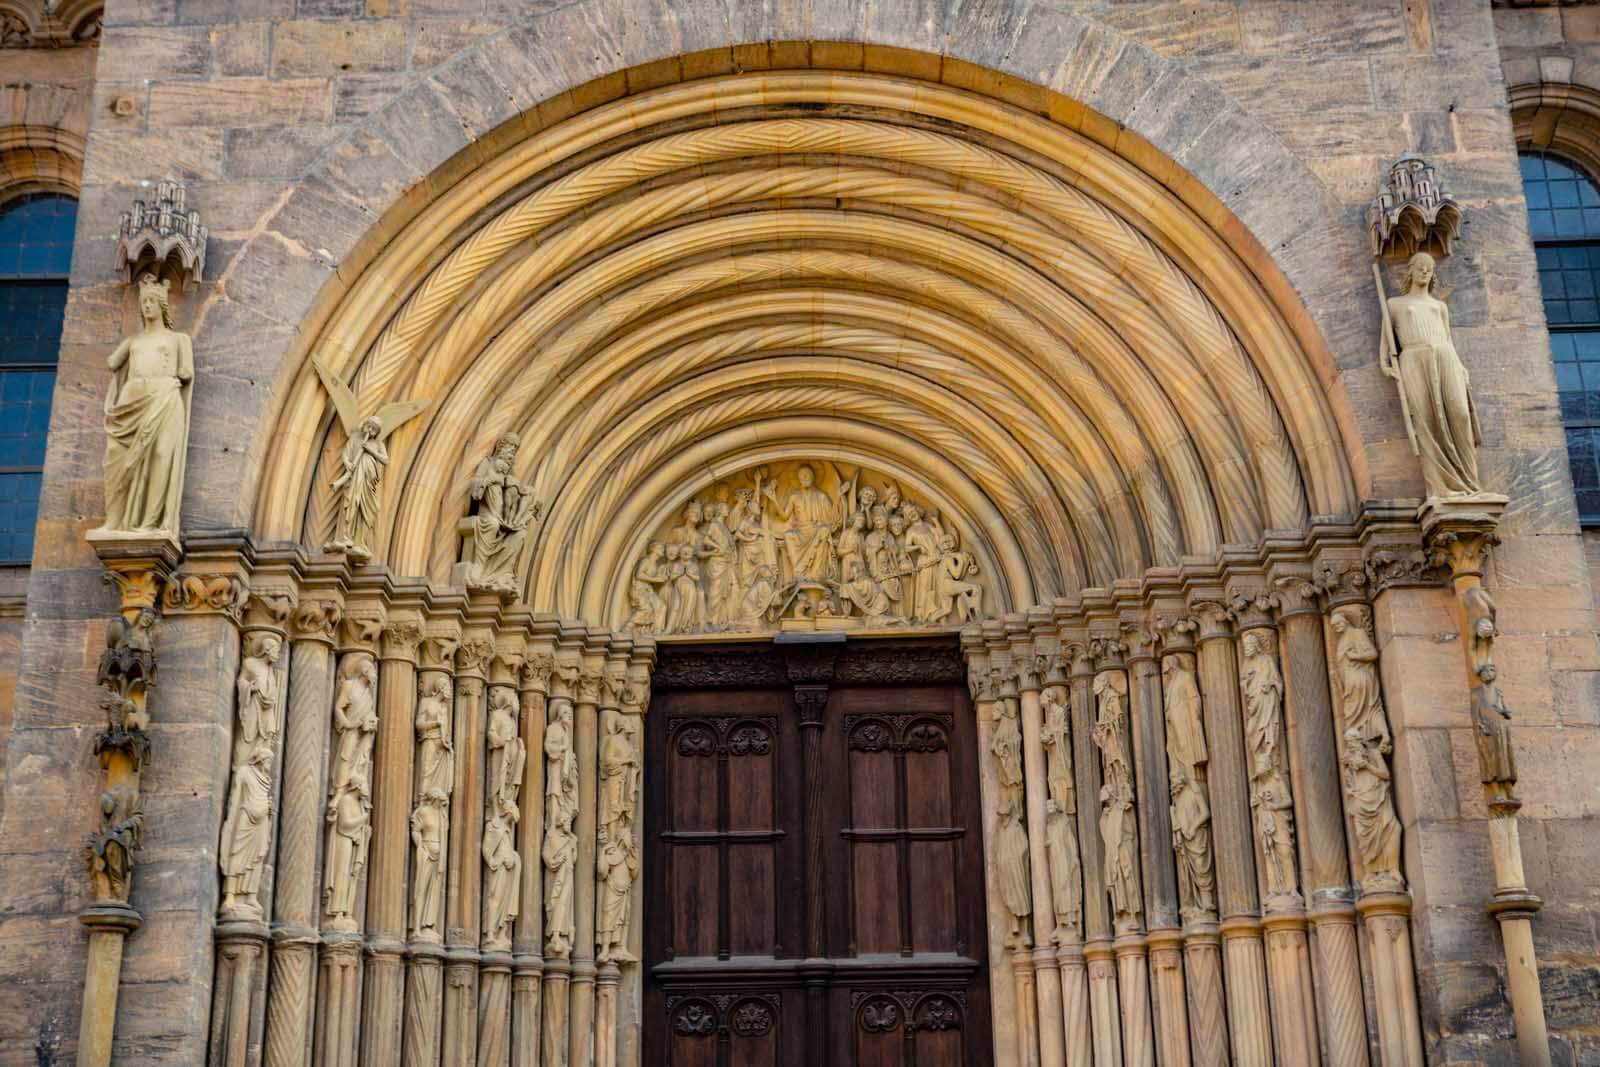 Entrance to the Bamburg Cathedral in Germany